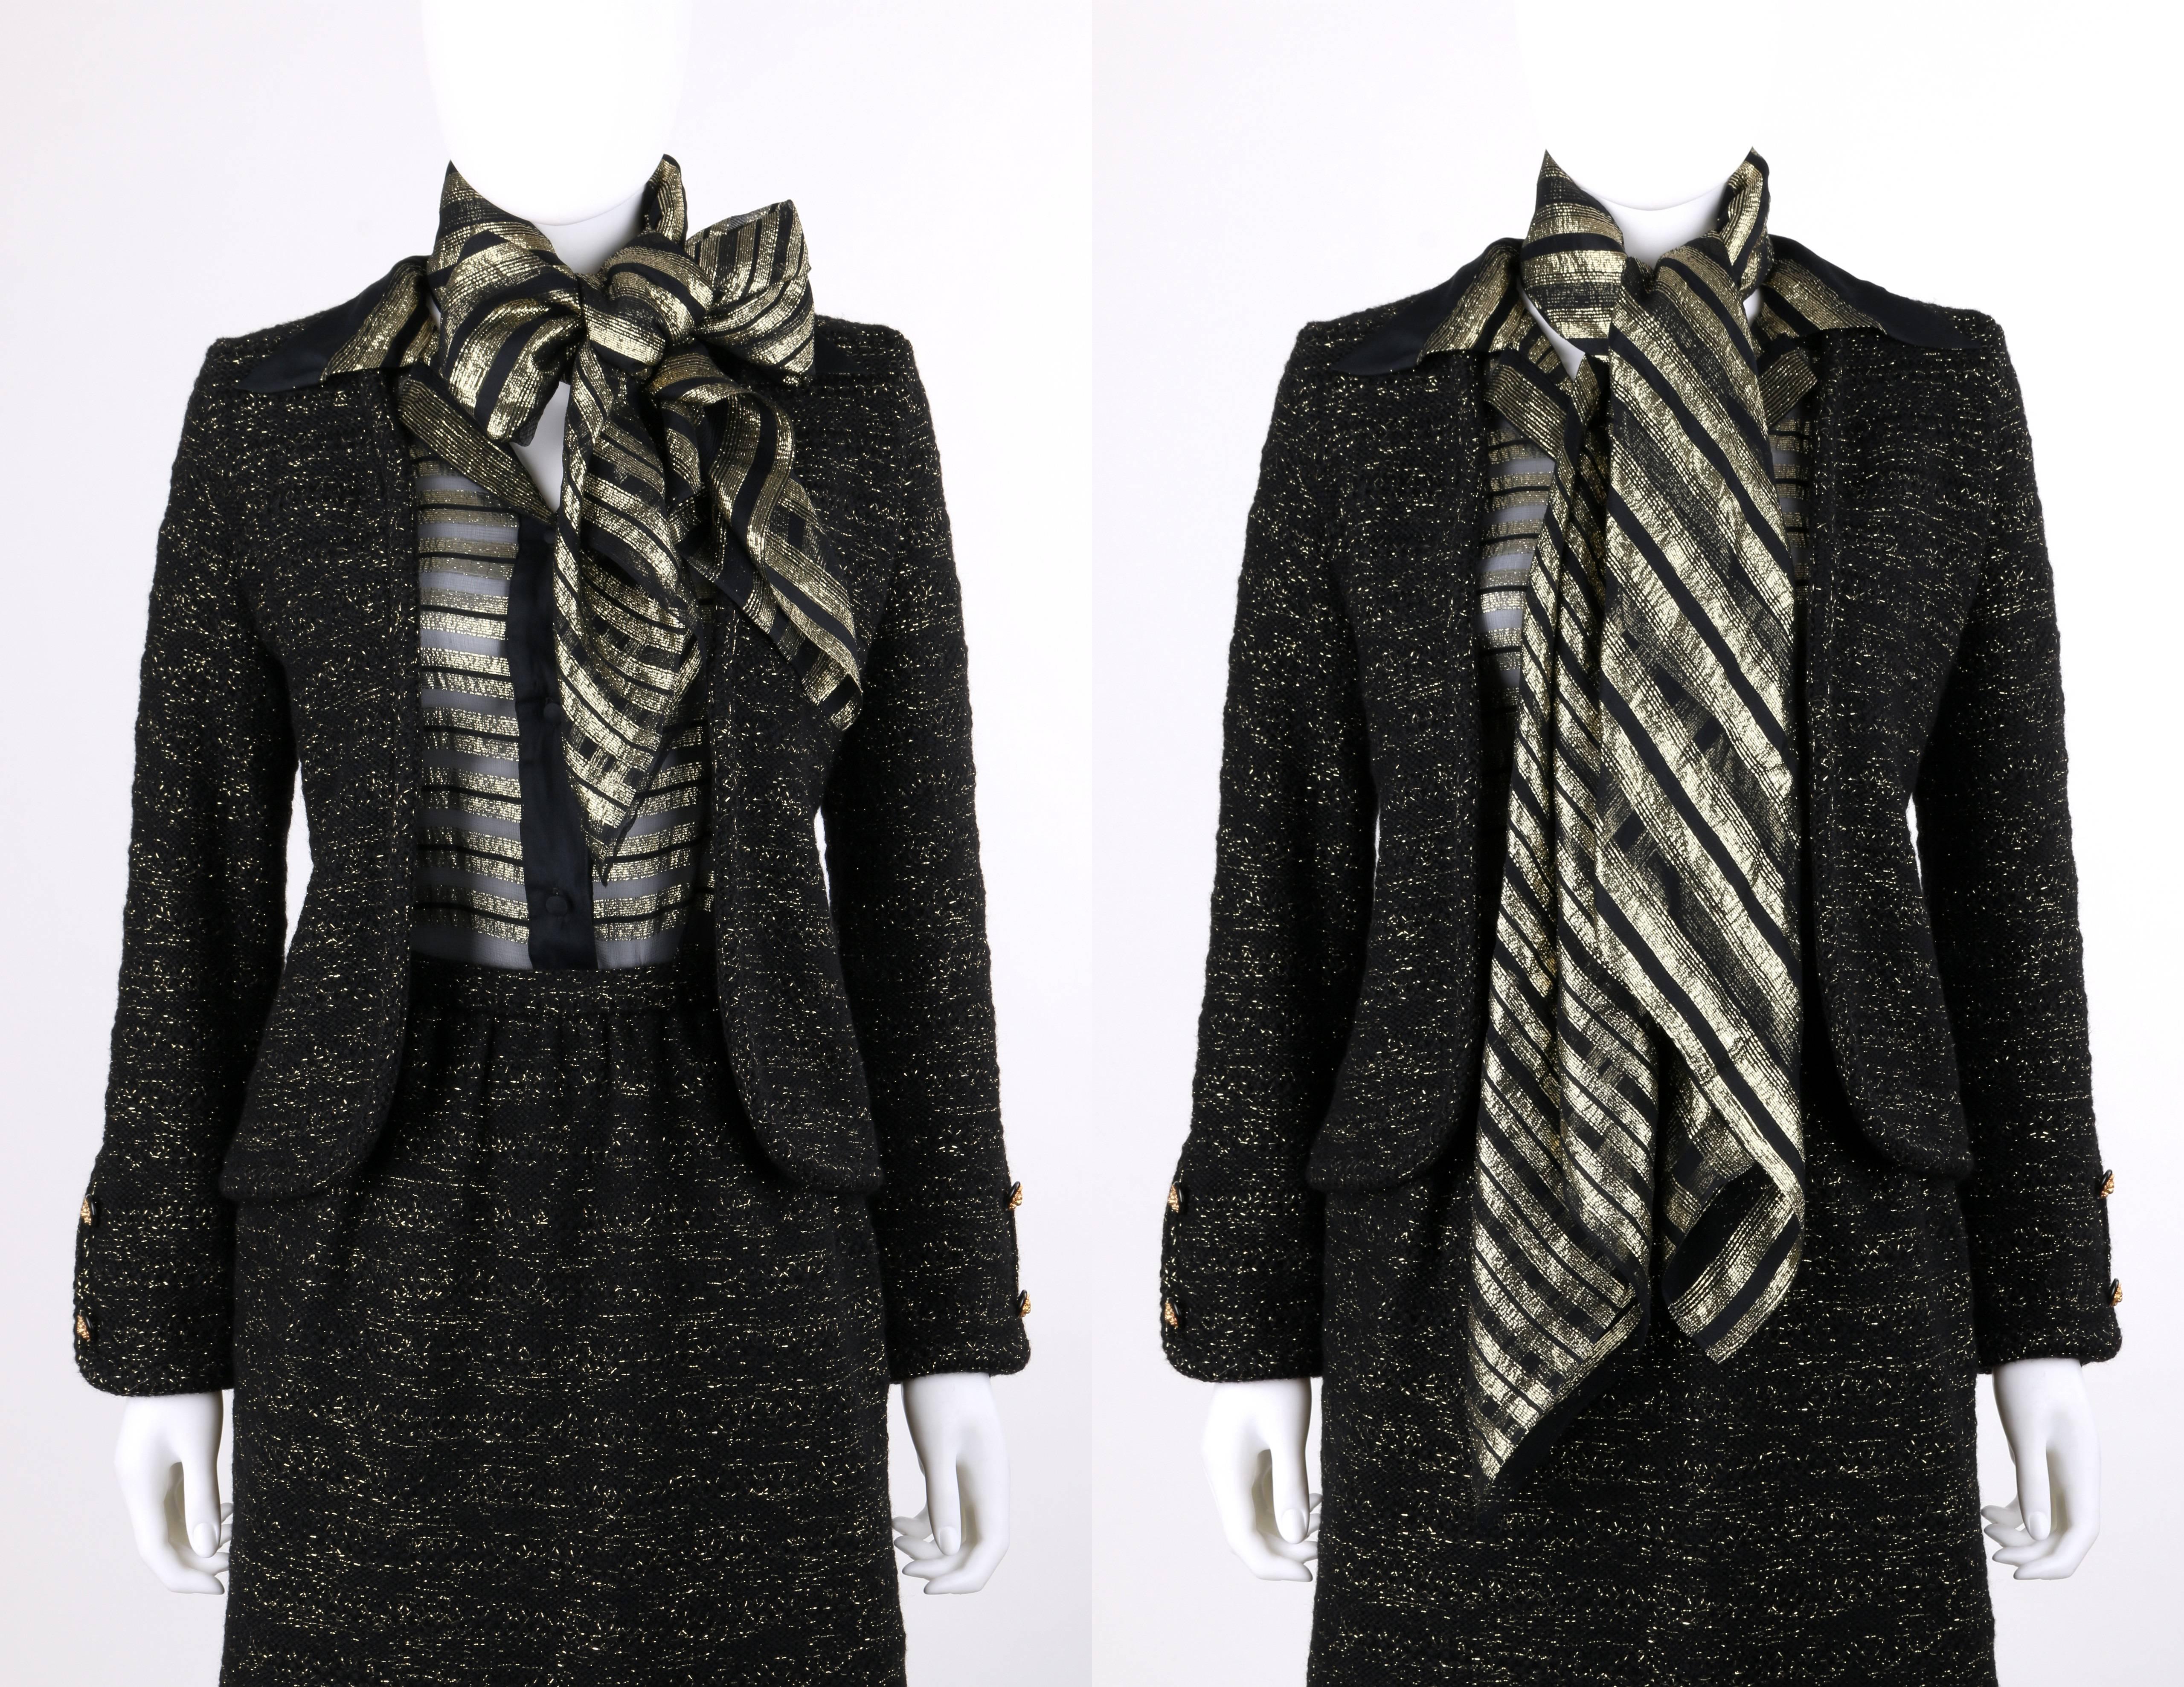 Vintage Chanel Creations c.1970's four piece black and gold lurex jacket blouse skirt suit set with scarf. Black wool and metallic gold knit jacket. Open front style. Long sleeves with two black and gold-toned lion head button detail at cuffs.